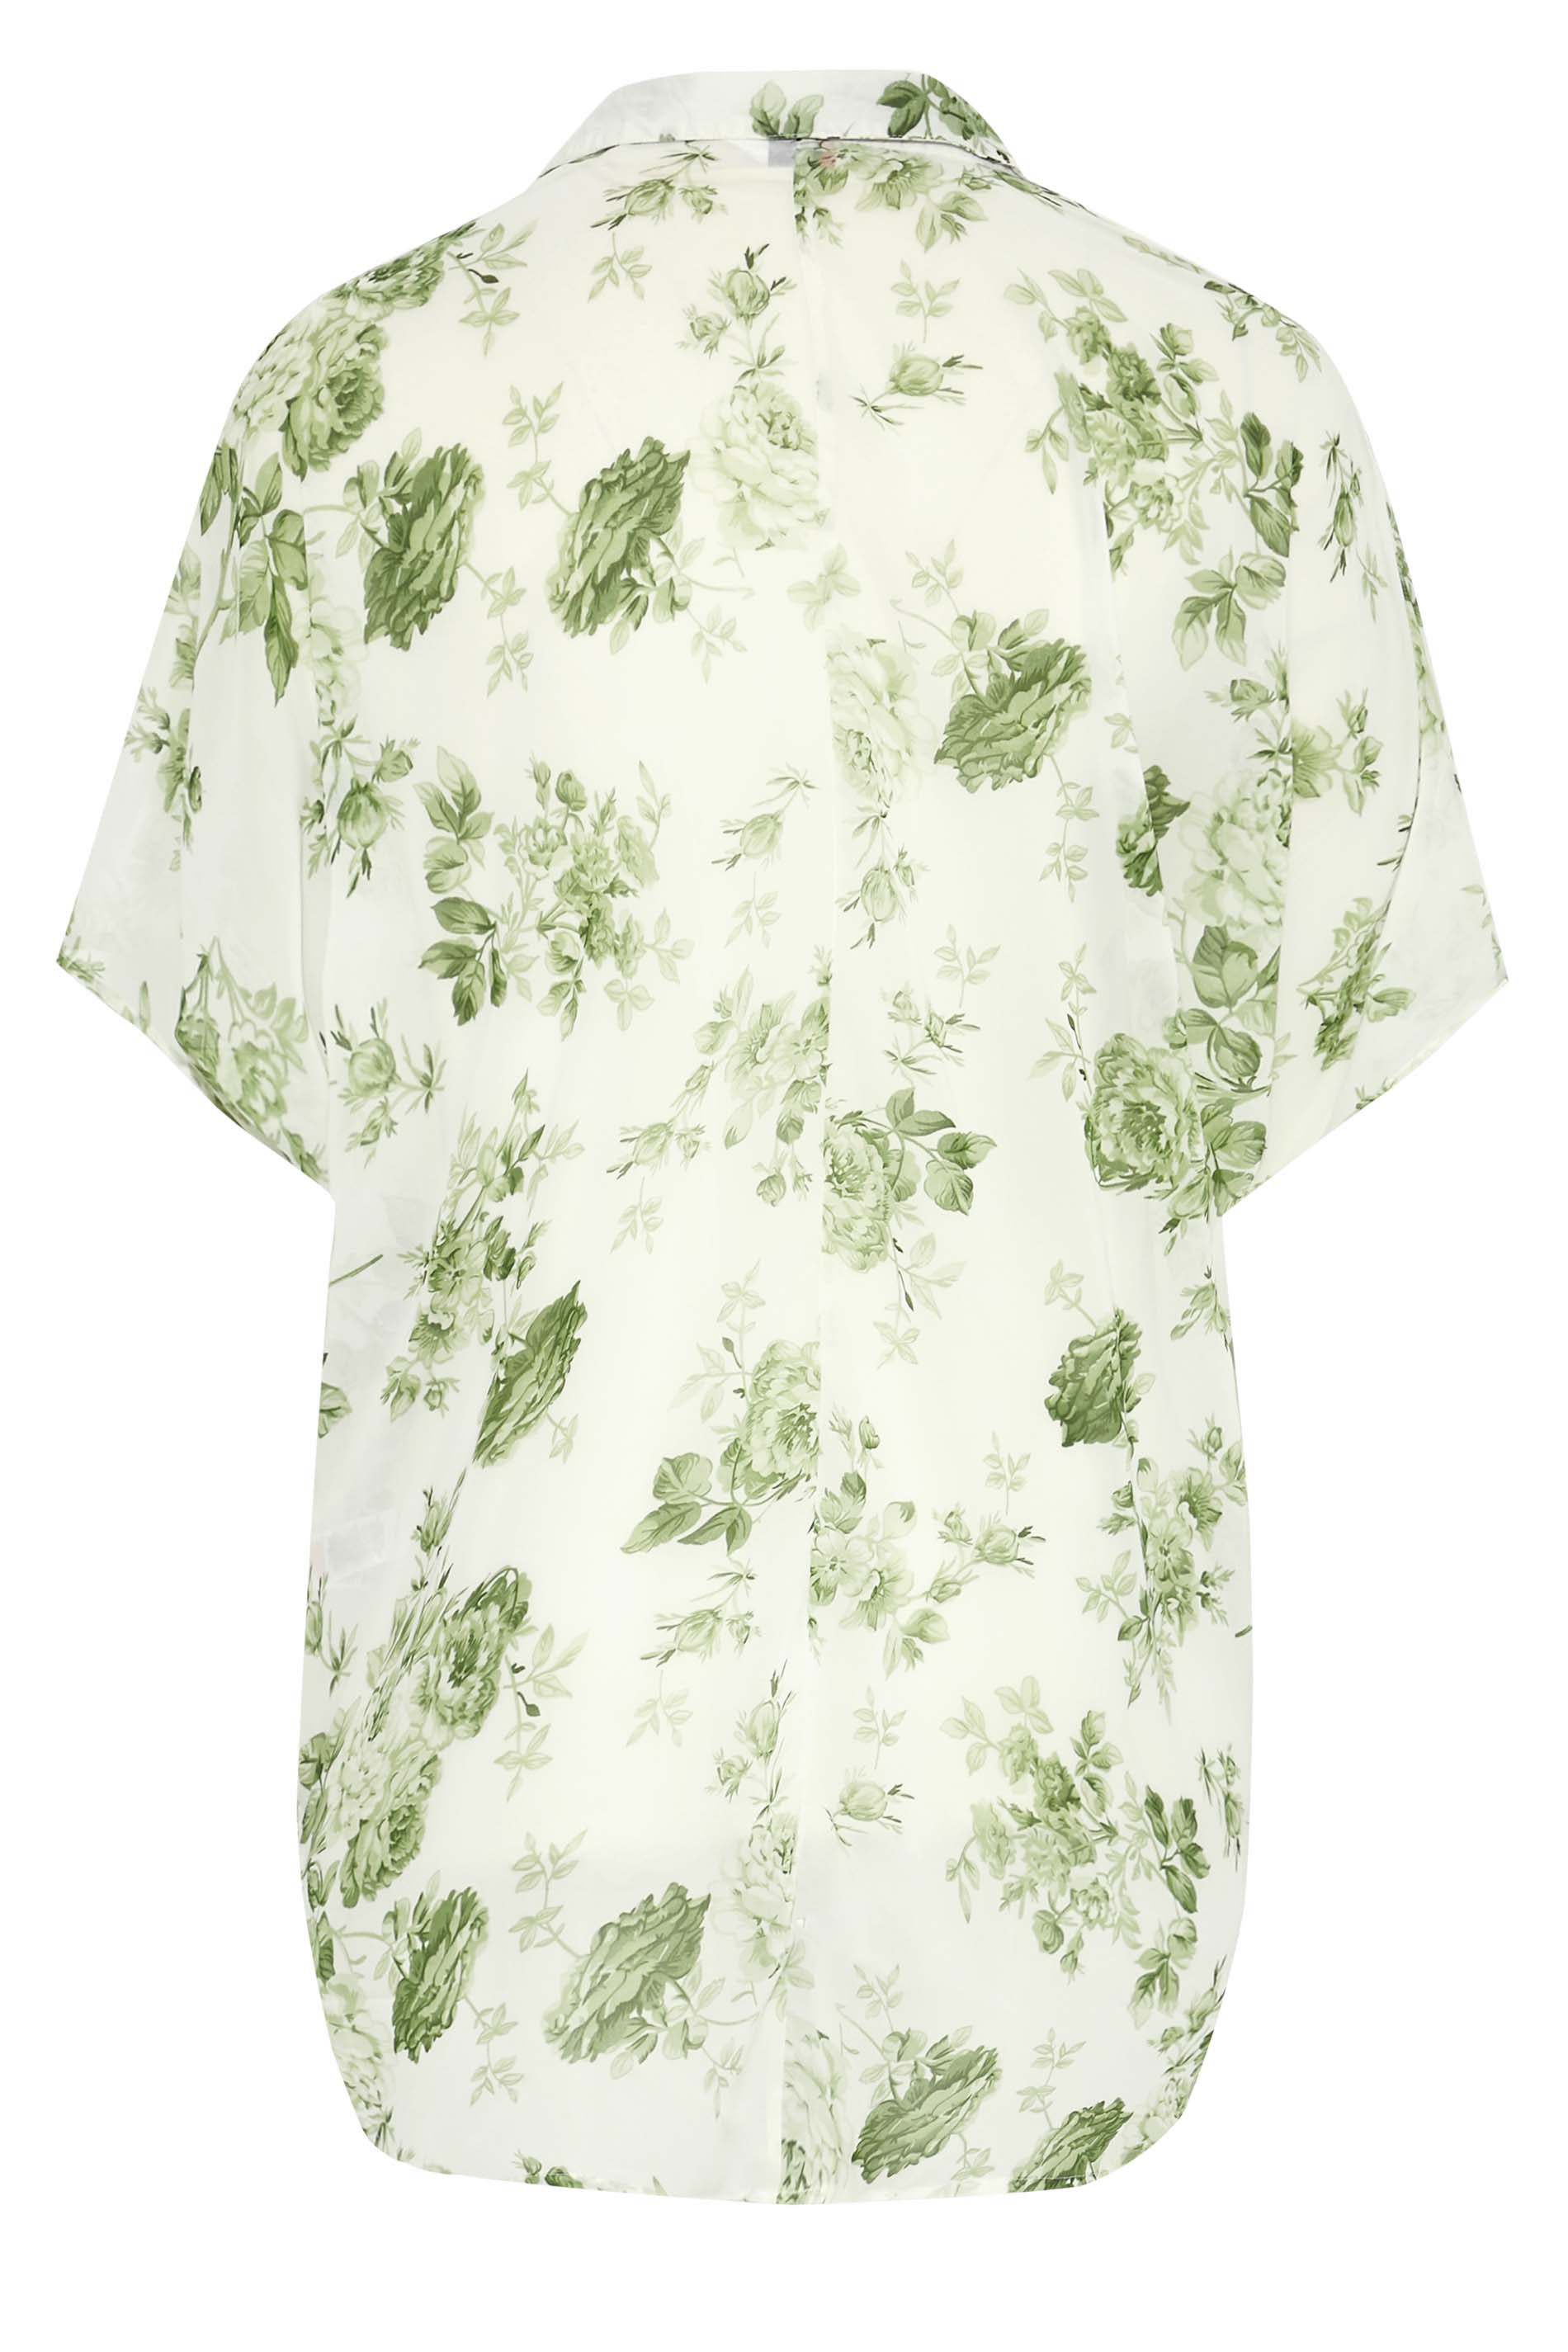 Grande taille  Tops Grande taille  Blouses & Chemisiers | Curve Green Floral Print Batwing Blouse - CG62020